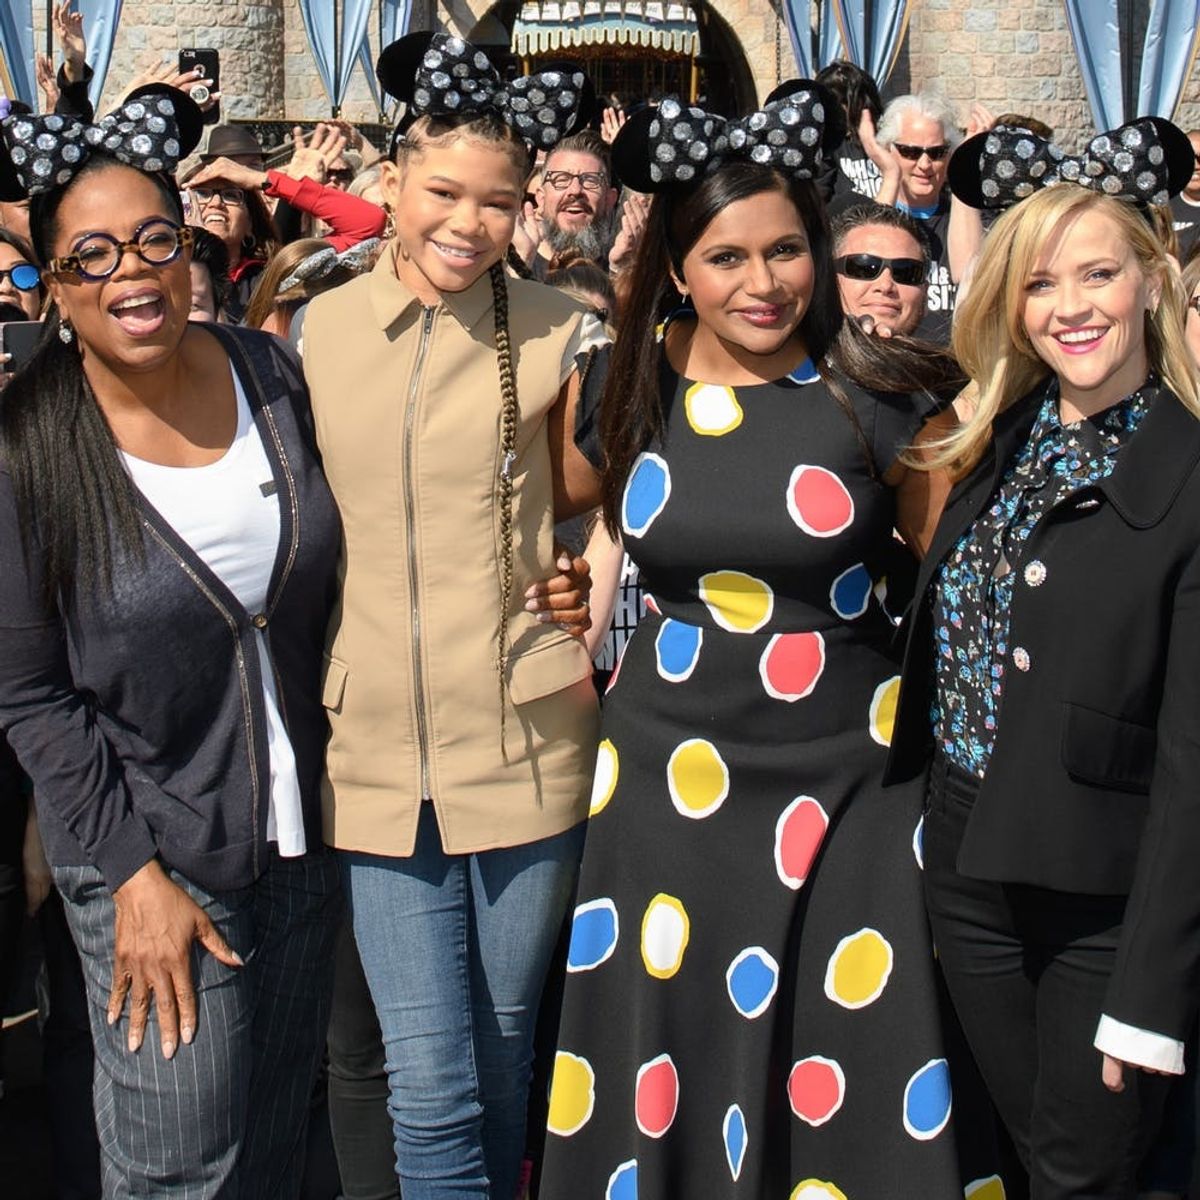 The Cast of ‘A Wrinkle in Time’ Surprised Fans at Disneyland